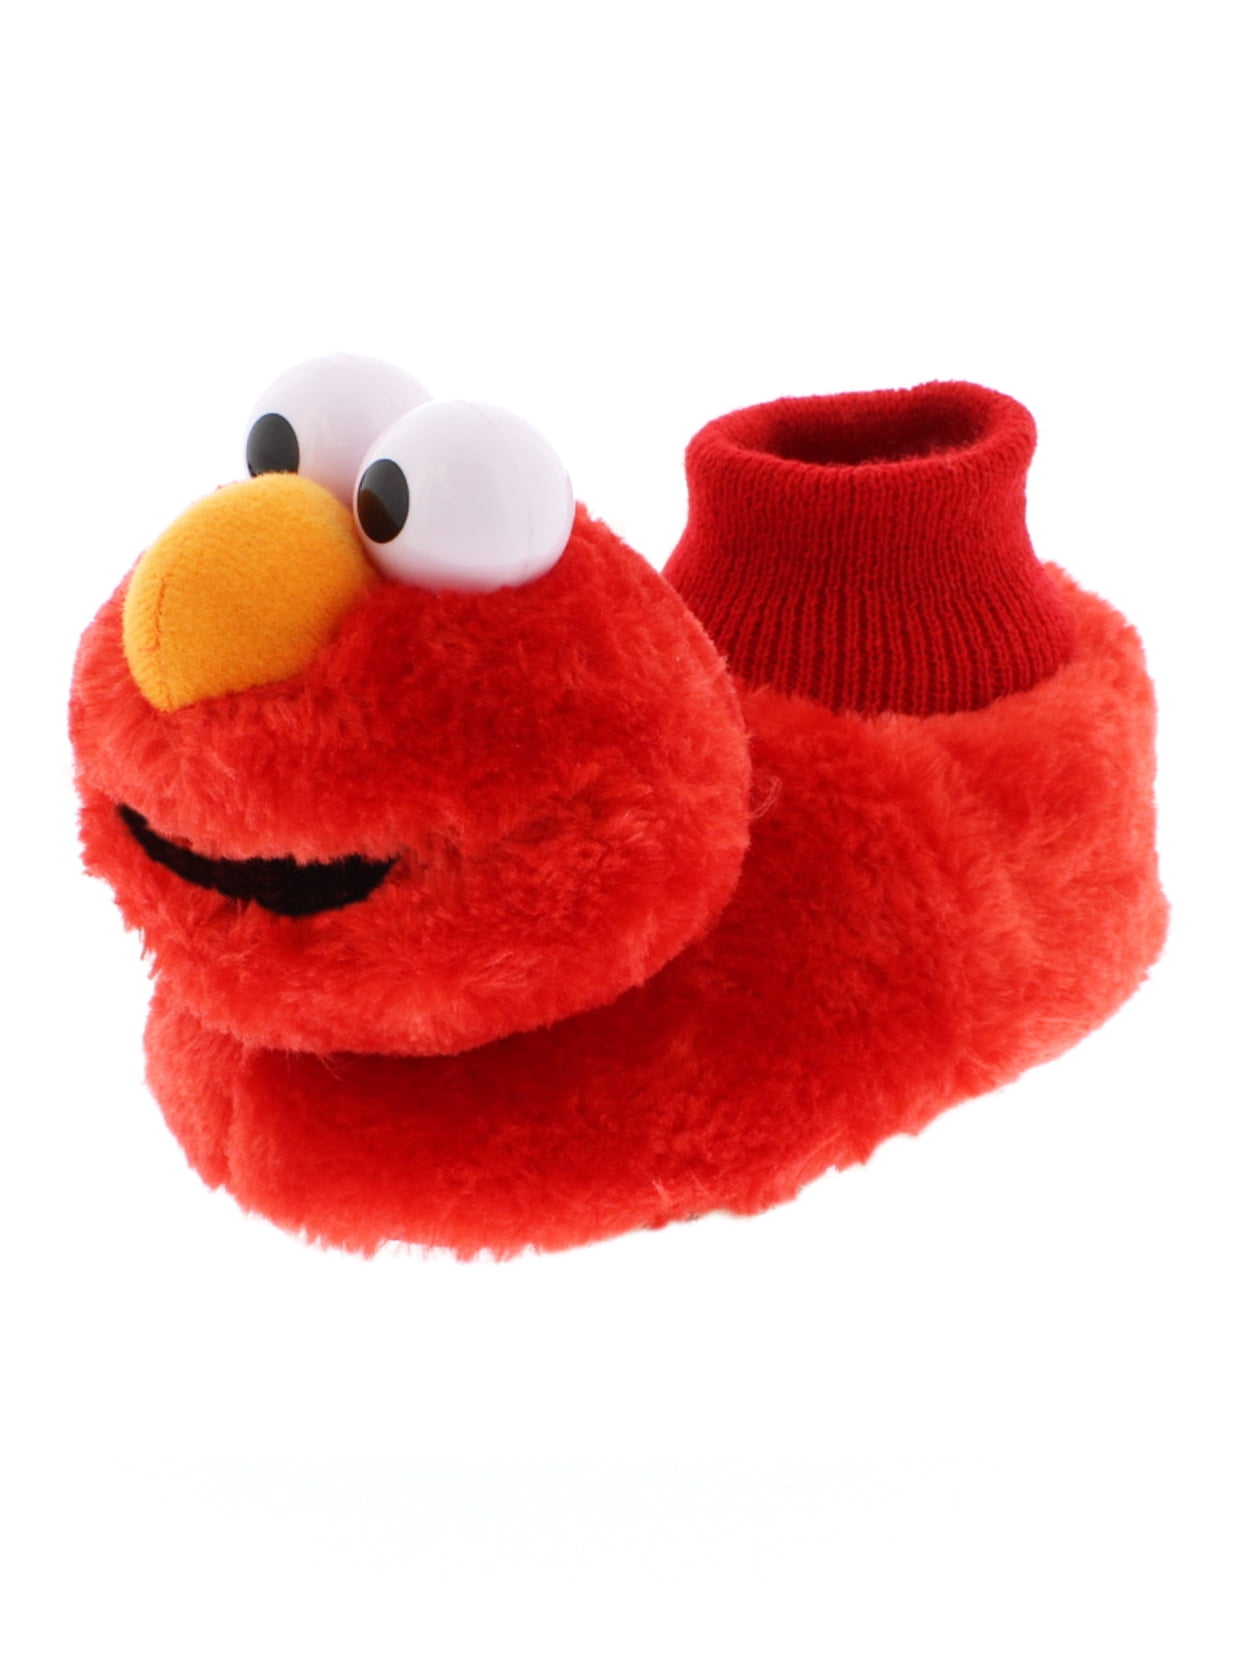 ELMO SESAME STREET Sock Top Puppet Slippers NWT Toddler's Size 5/6 7/8 or 9/10 